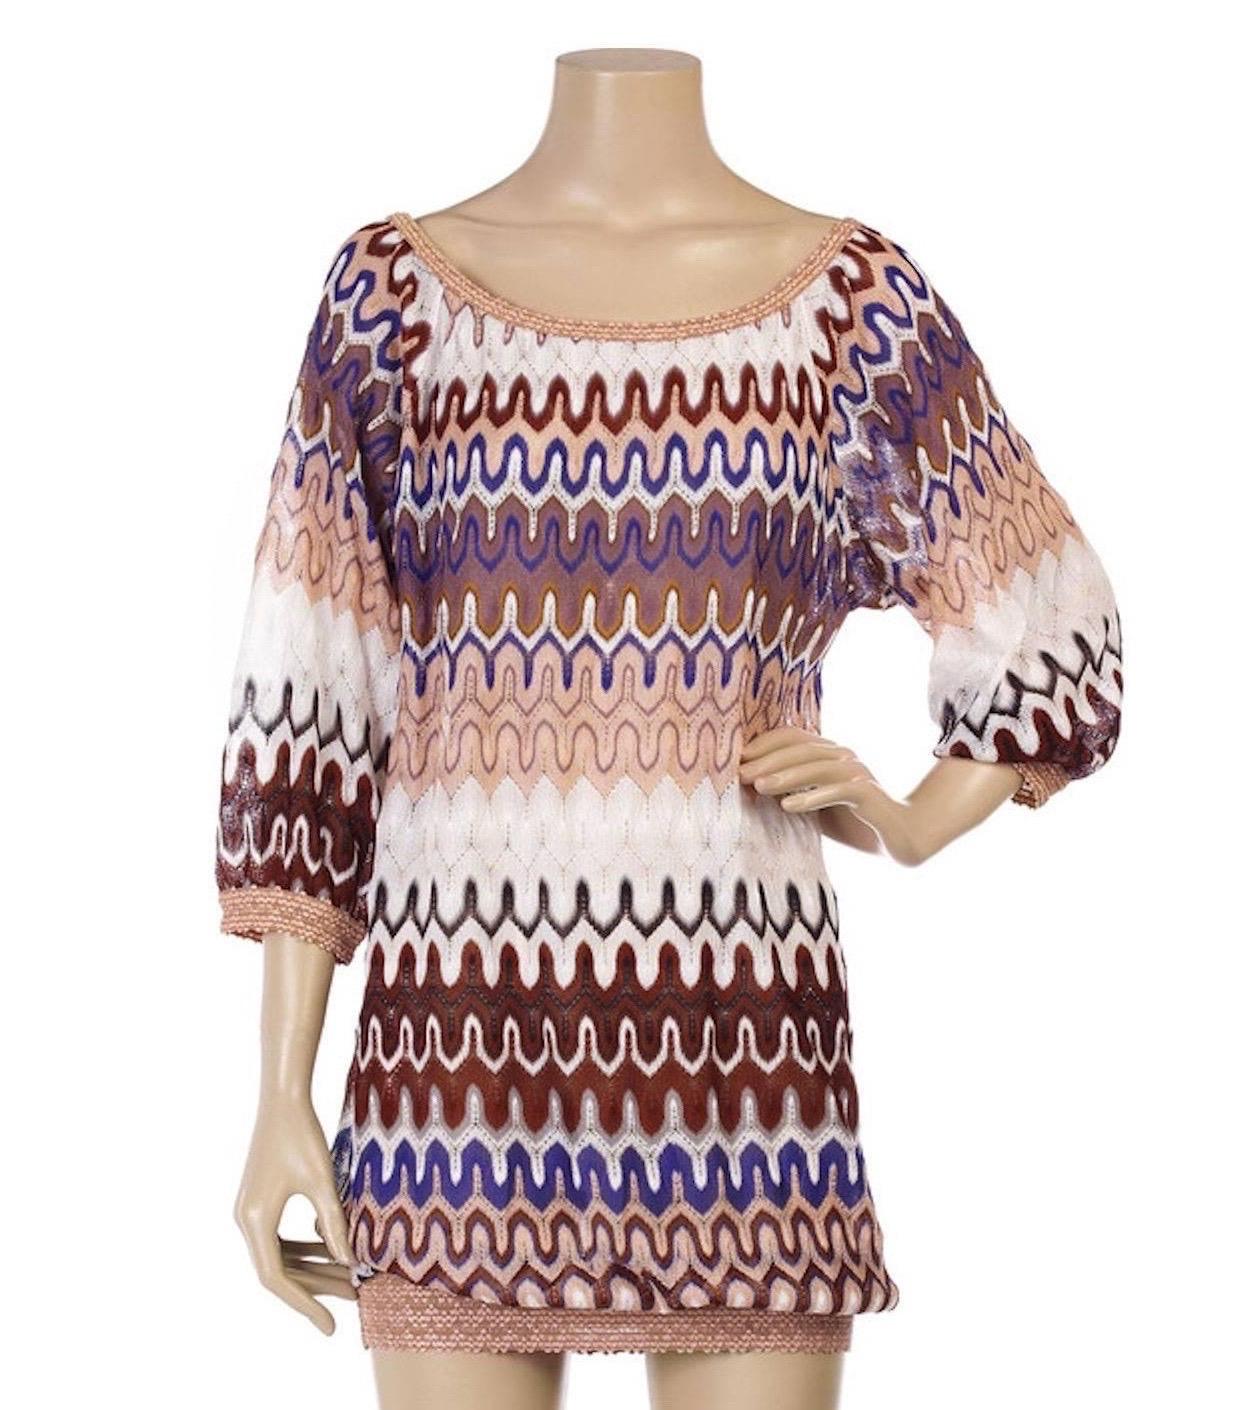 

Stunning dress from MISSONI main line
Beautiful shades
Classic MISSONI signature zigzag crochet knit
Simply slips on
Bateau neck
Batwing / Dolman half-length sleeves
Contrast trim
Elasticated neck and hem
100% Rayon
Dry Clean only
Size 38
